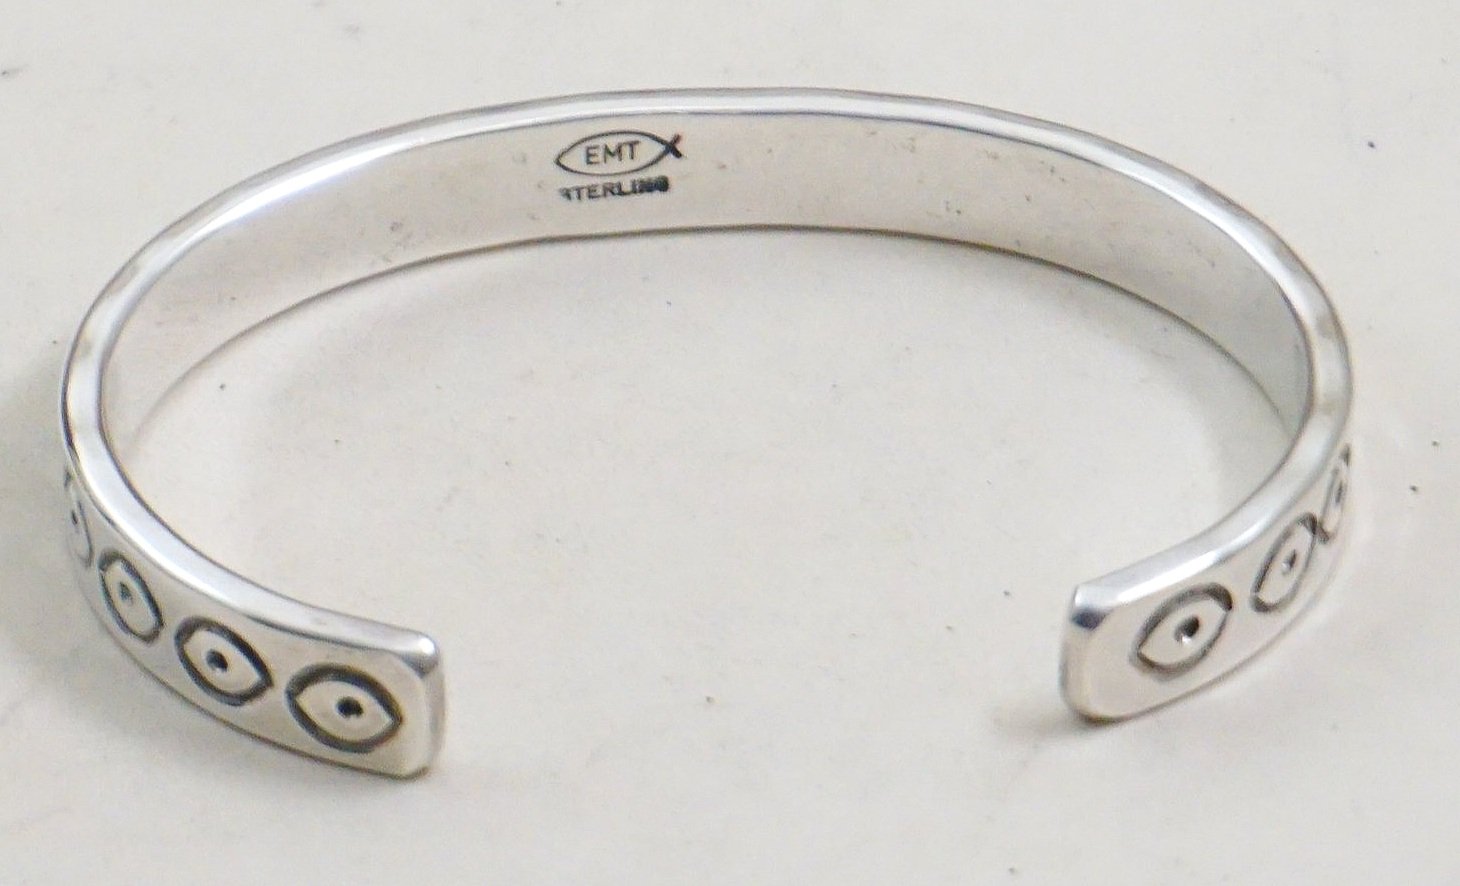 STAINLESS STEEL SMALL SOLID&LARGE OPEN HEART LINK BRACELET 1/2" WIDE 8" LONG 